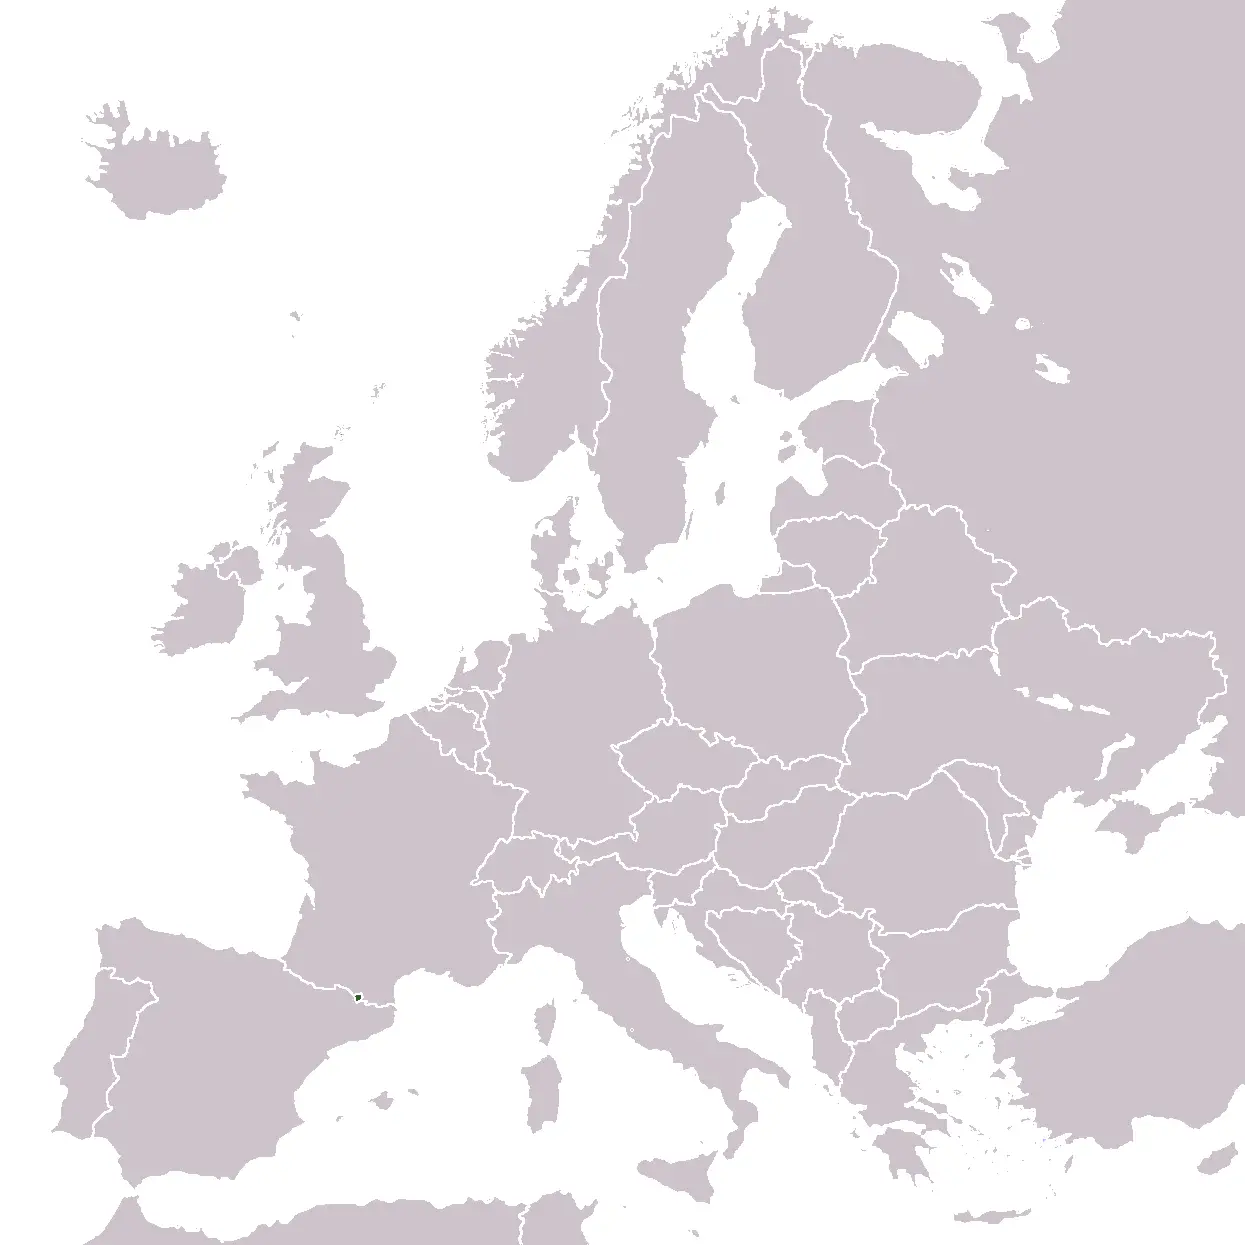 Europe Location And